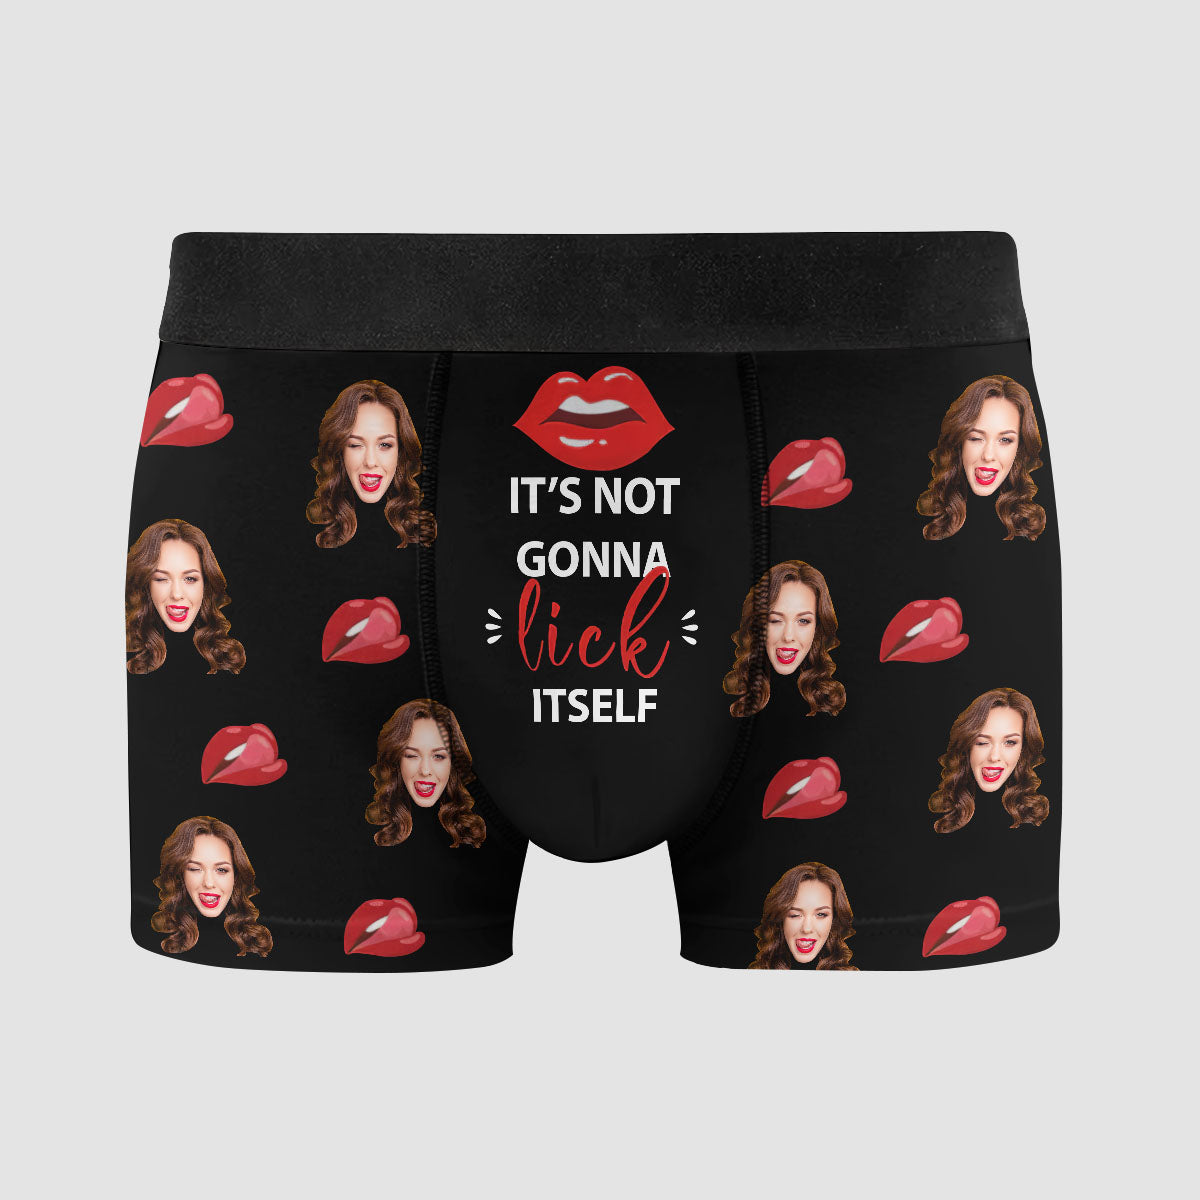 It's Not Gonna Lick Itself - Personalized Custom Men's Boxer Briefs - Gift For Couple, Boyfriend, Husband